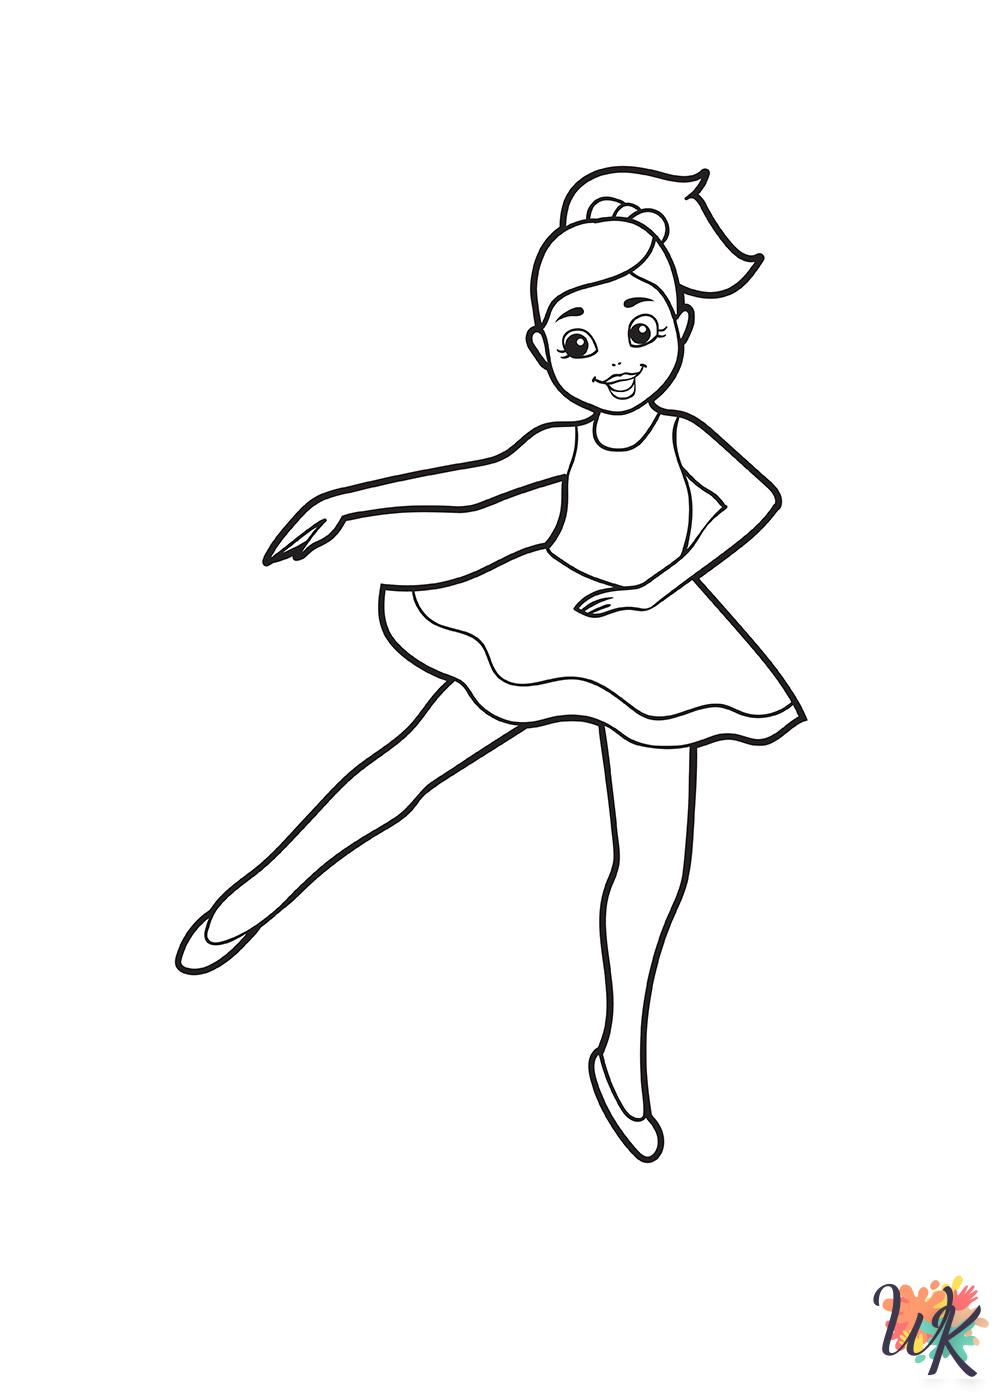 Ballerina coloring pages for adults